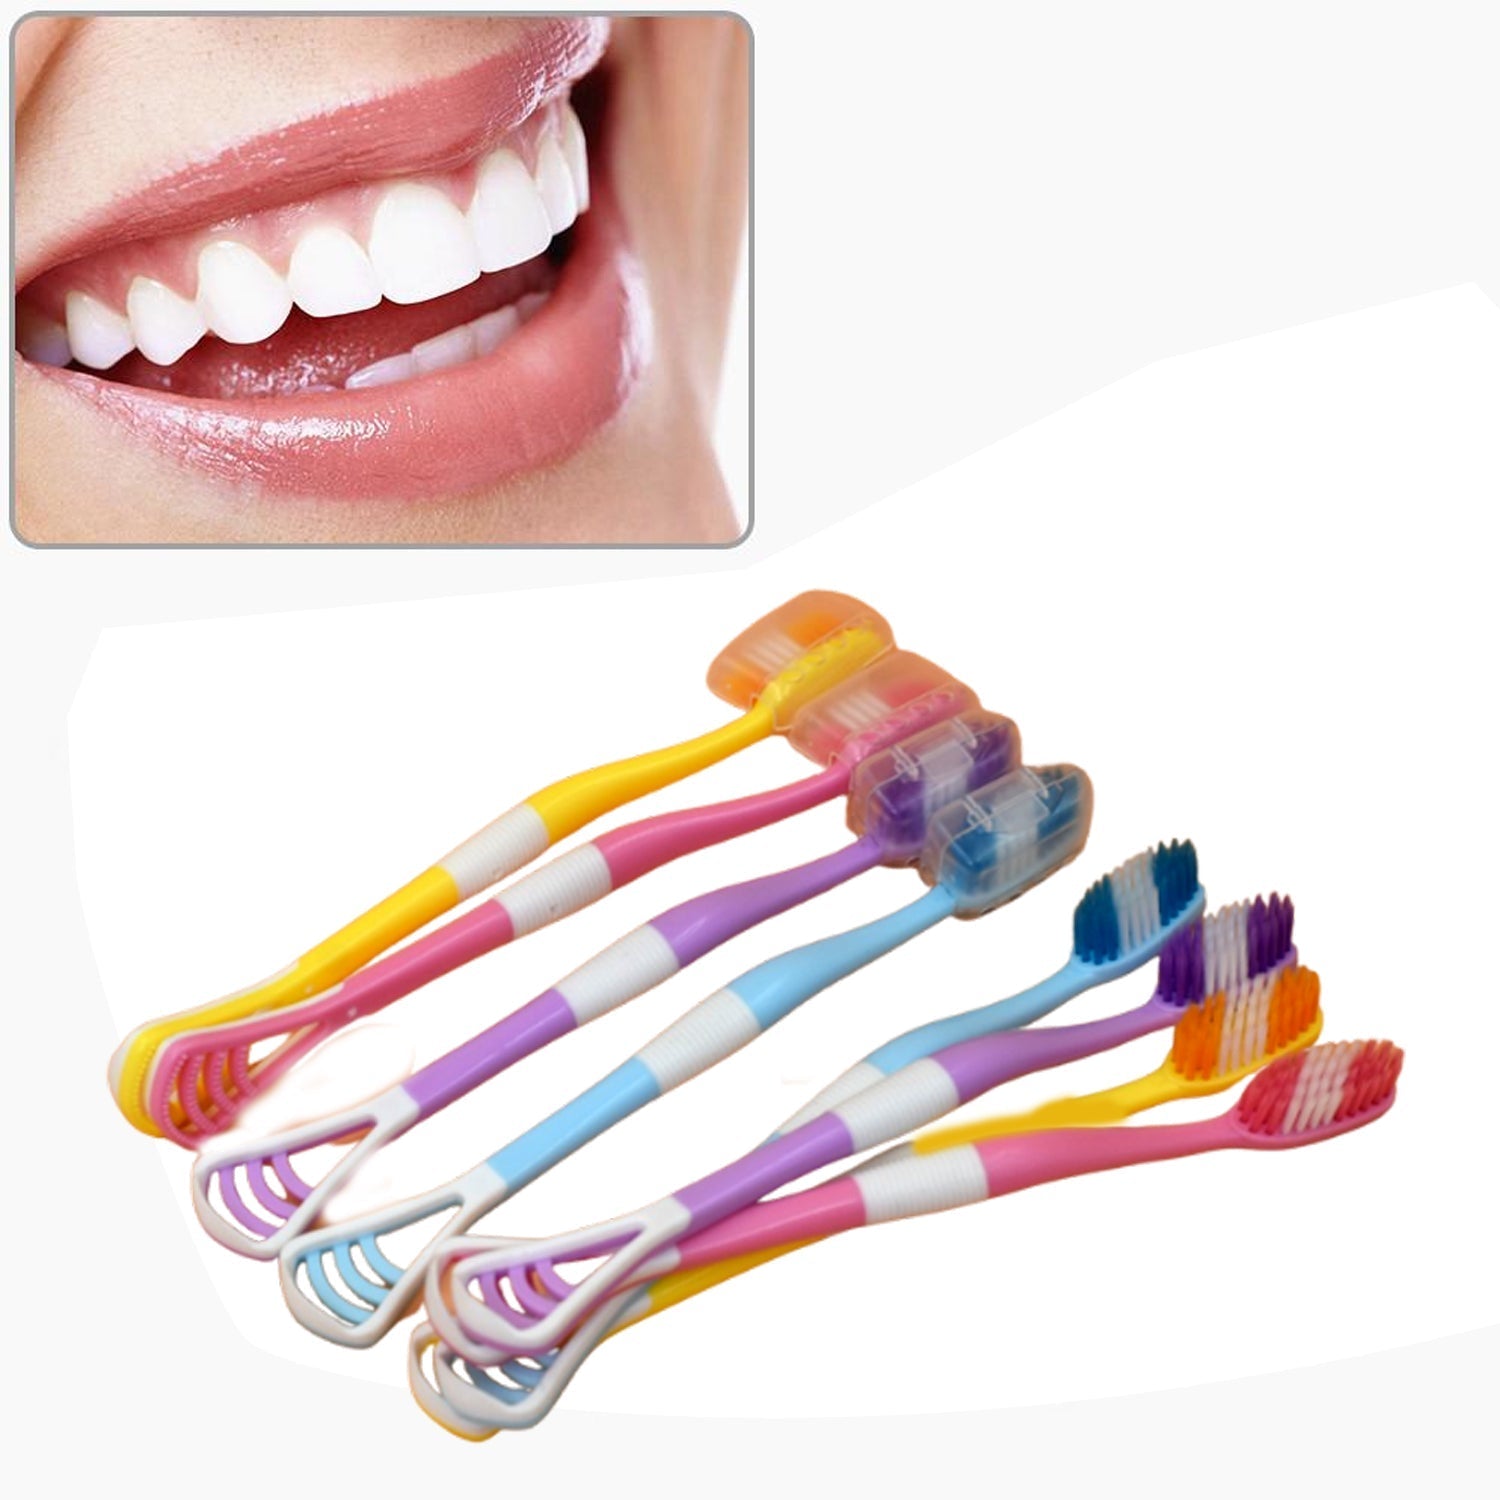 6150 8 Pc 2 in 1 Toothbrush Case widely used in all types of bathroom places for holding and storing toothbrushes and toothpastes of all types of family members etc. DeoDap